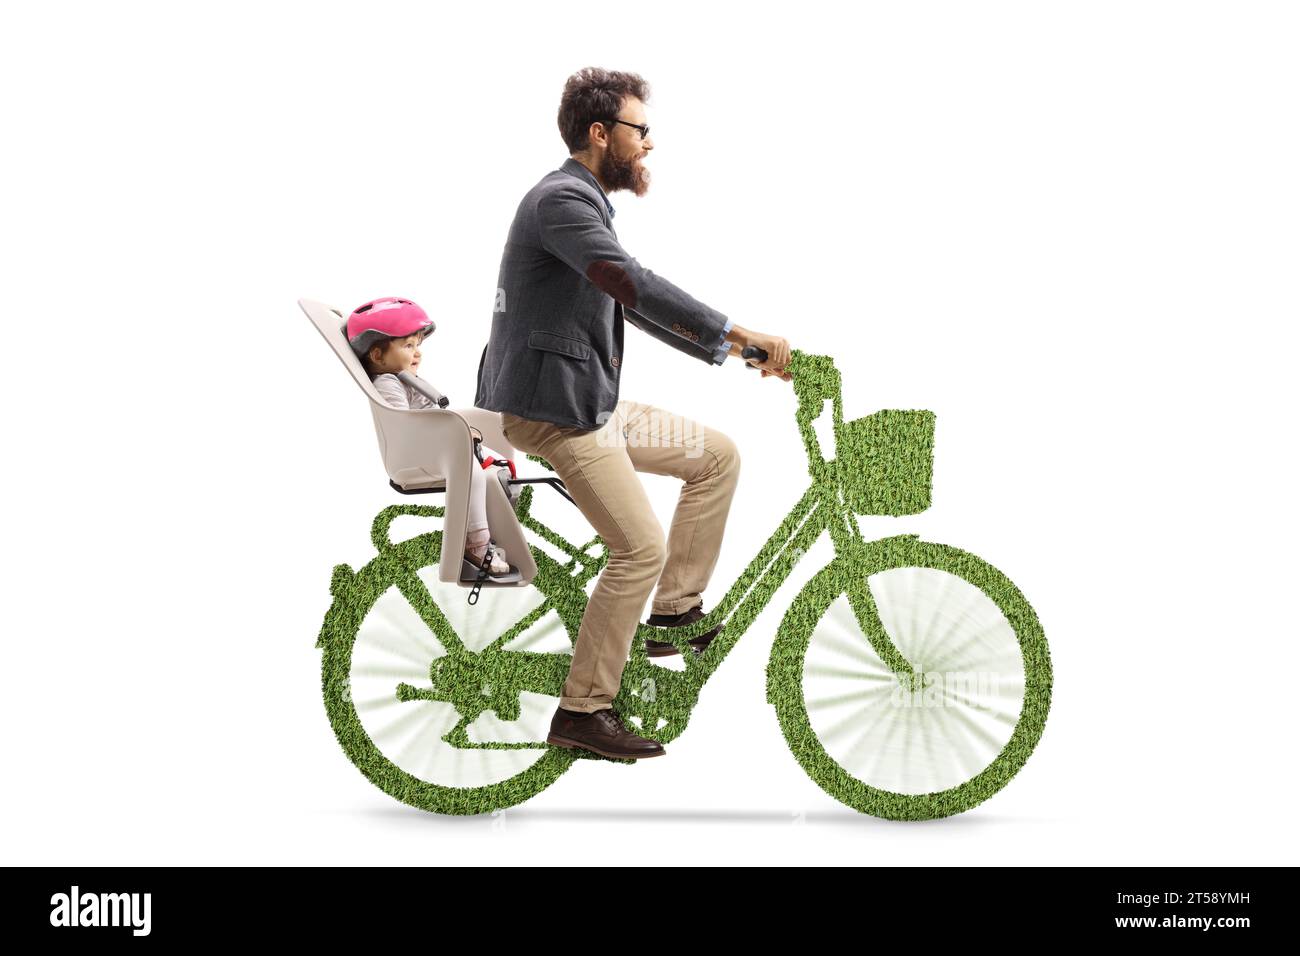 Father riding a child on a green bicycle, sustainable mobility concept Stock Photo